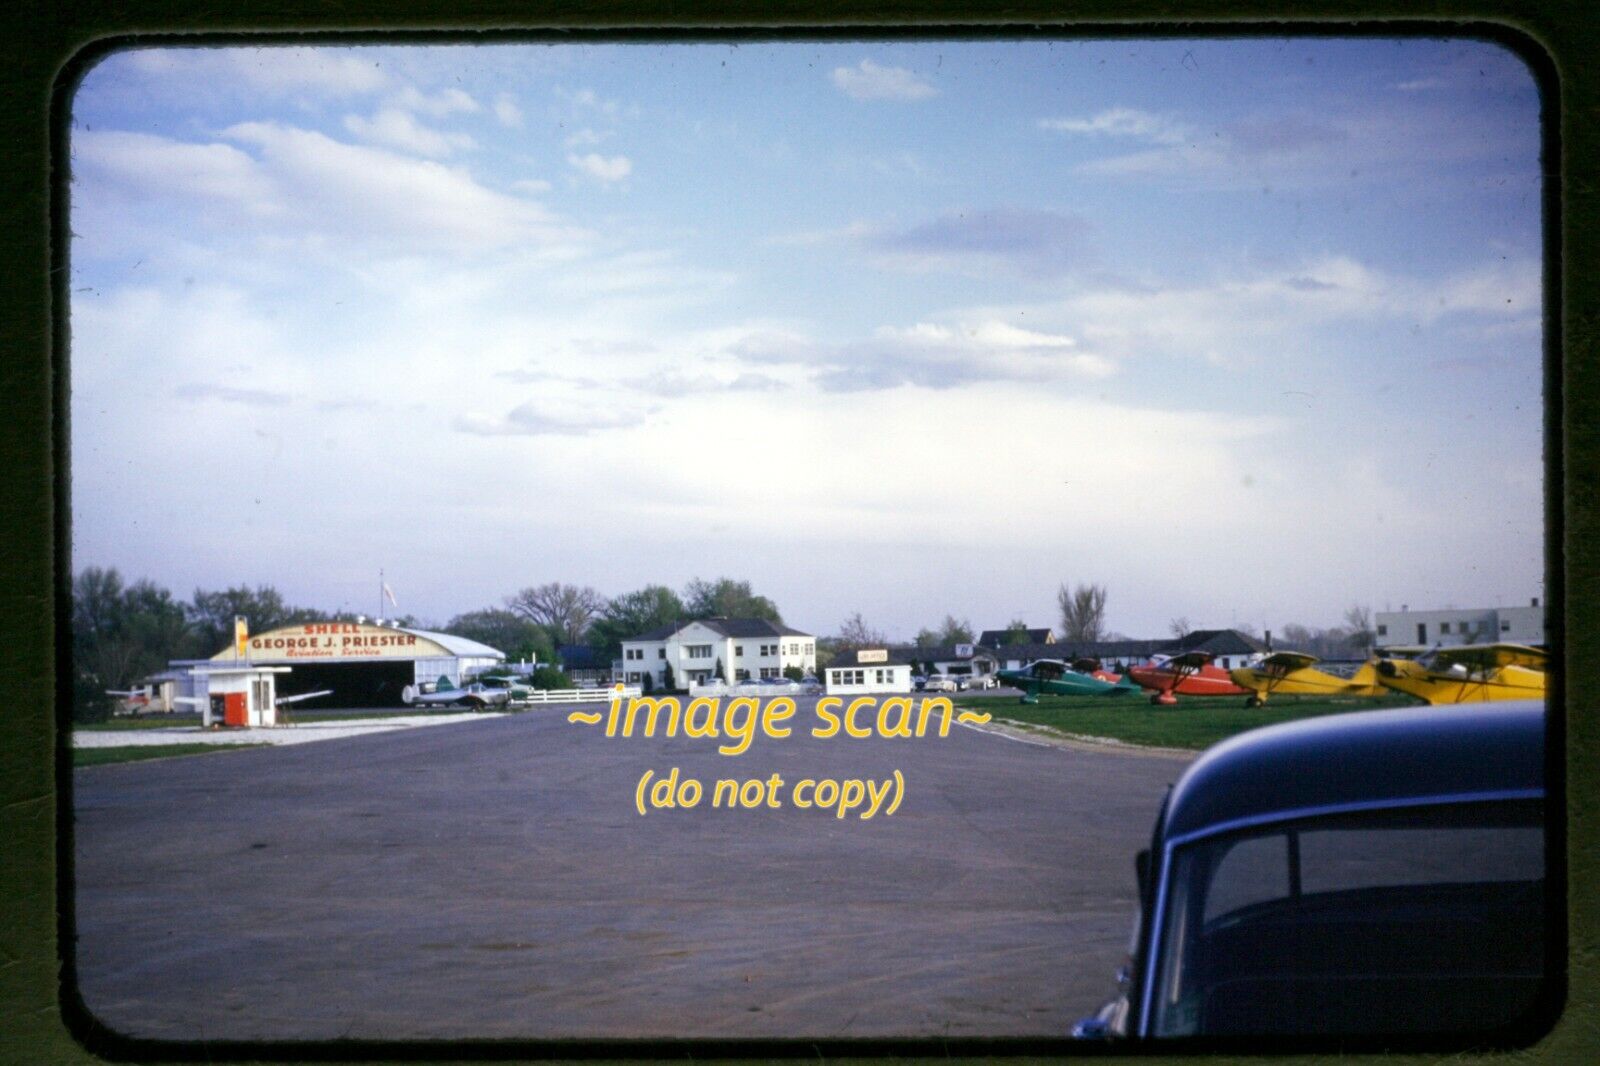 Private Aircraft at Wheeling, Illinois Airport in 1950\'s, Original Slide g15b